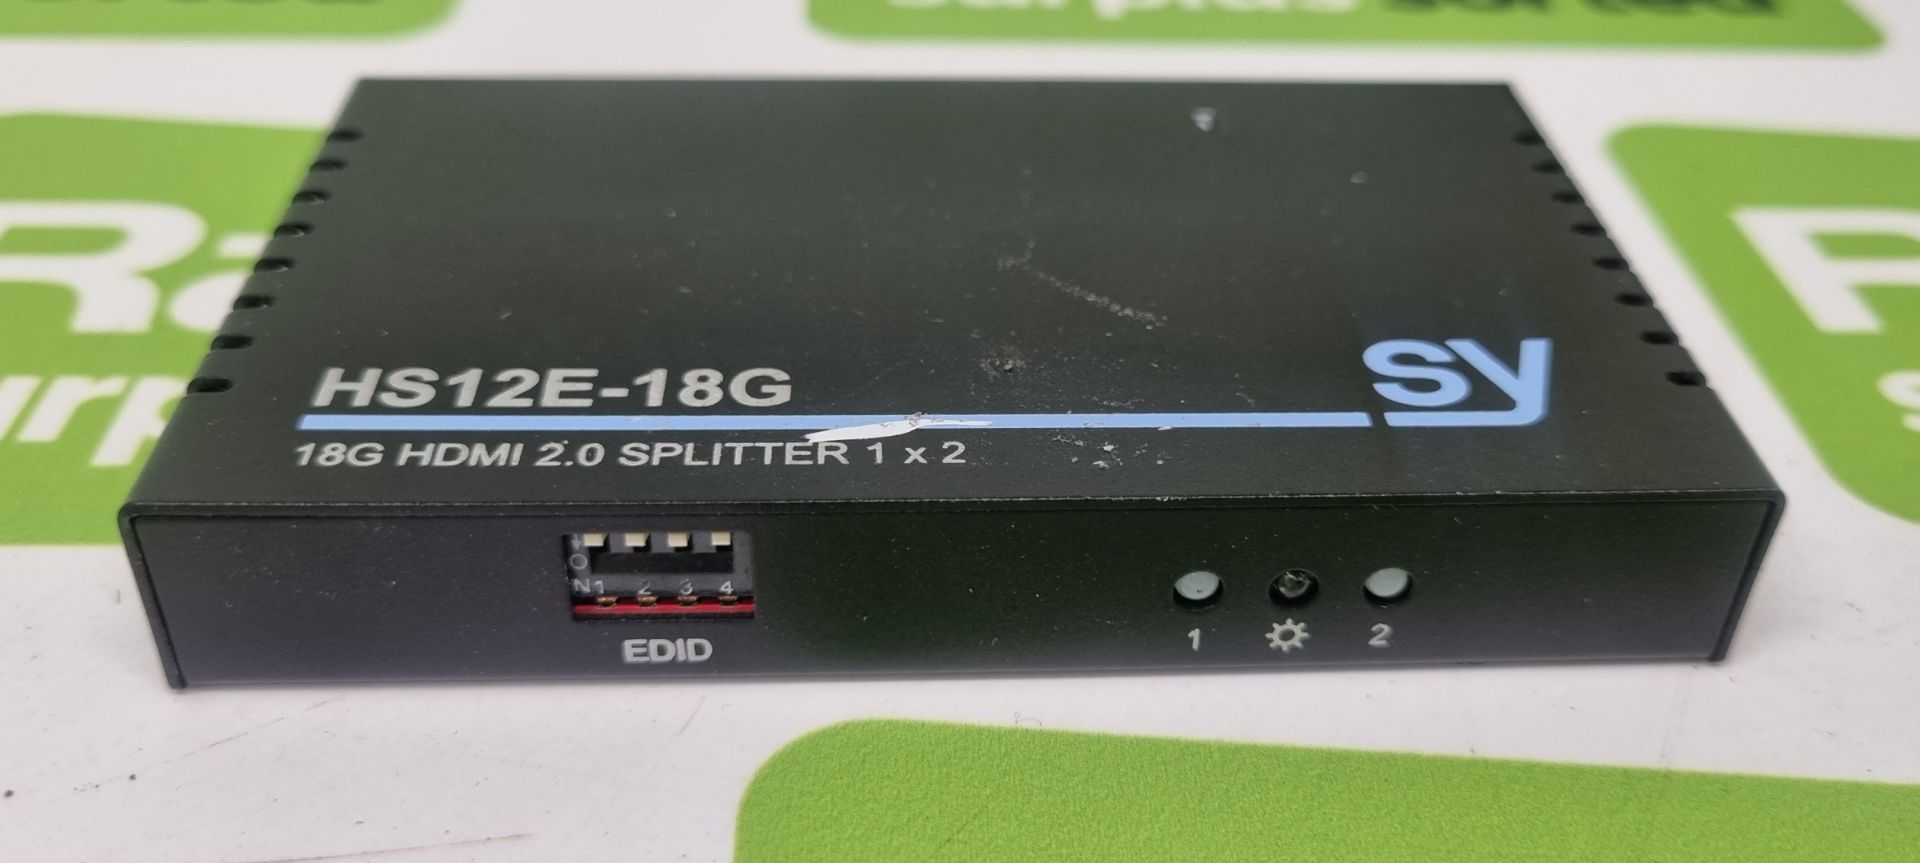 SY-HS12E-18G 1x2 HDMI 2.0 (18Gbps) splitter - Image 4 of 7